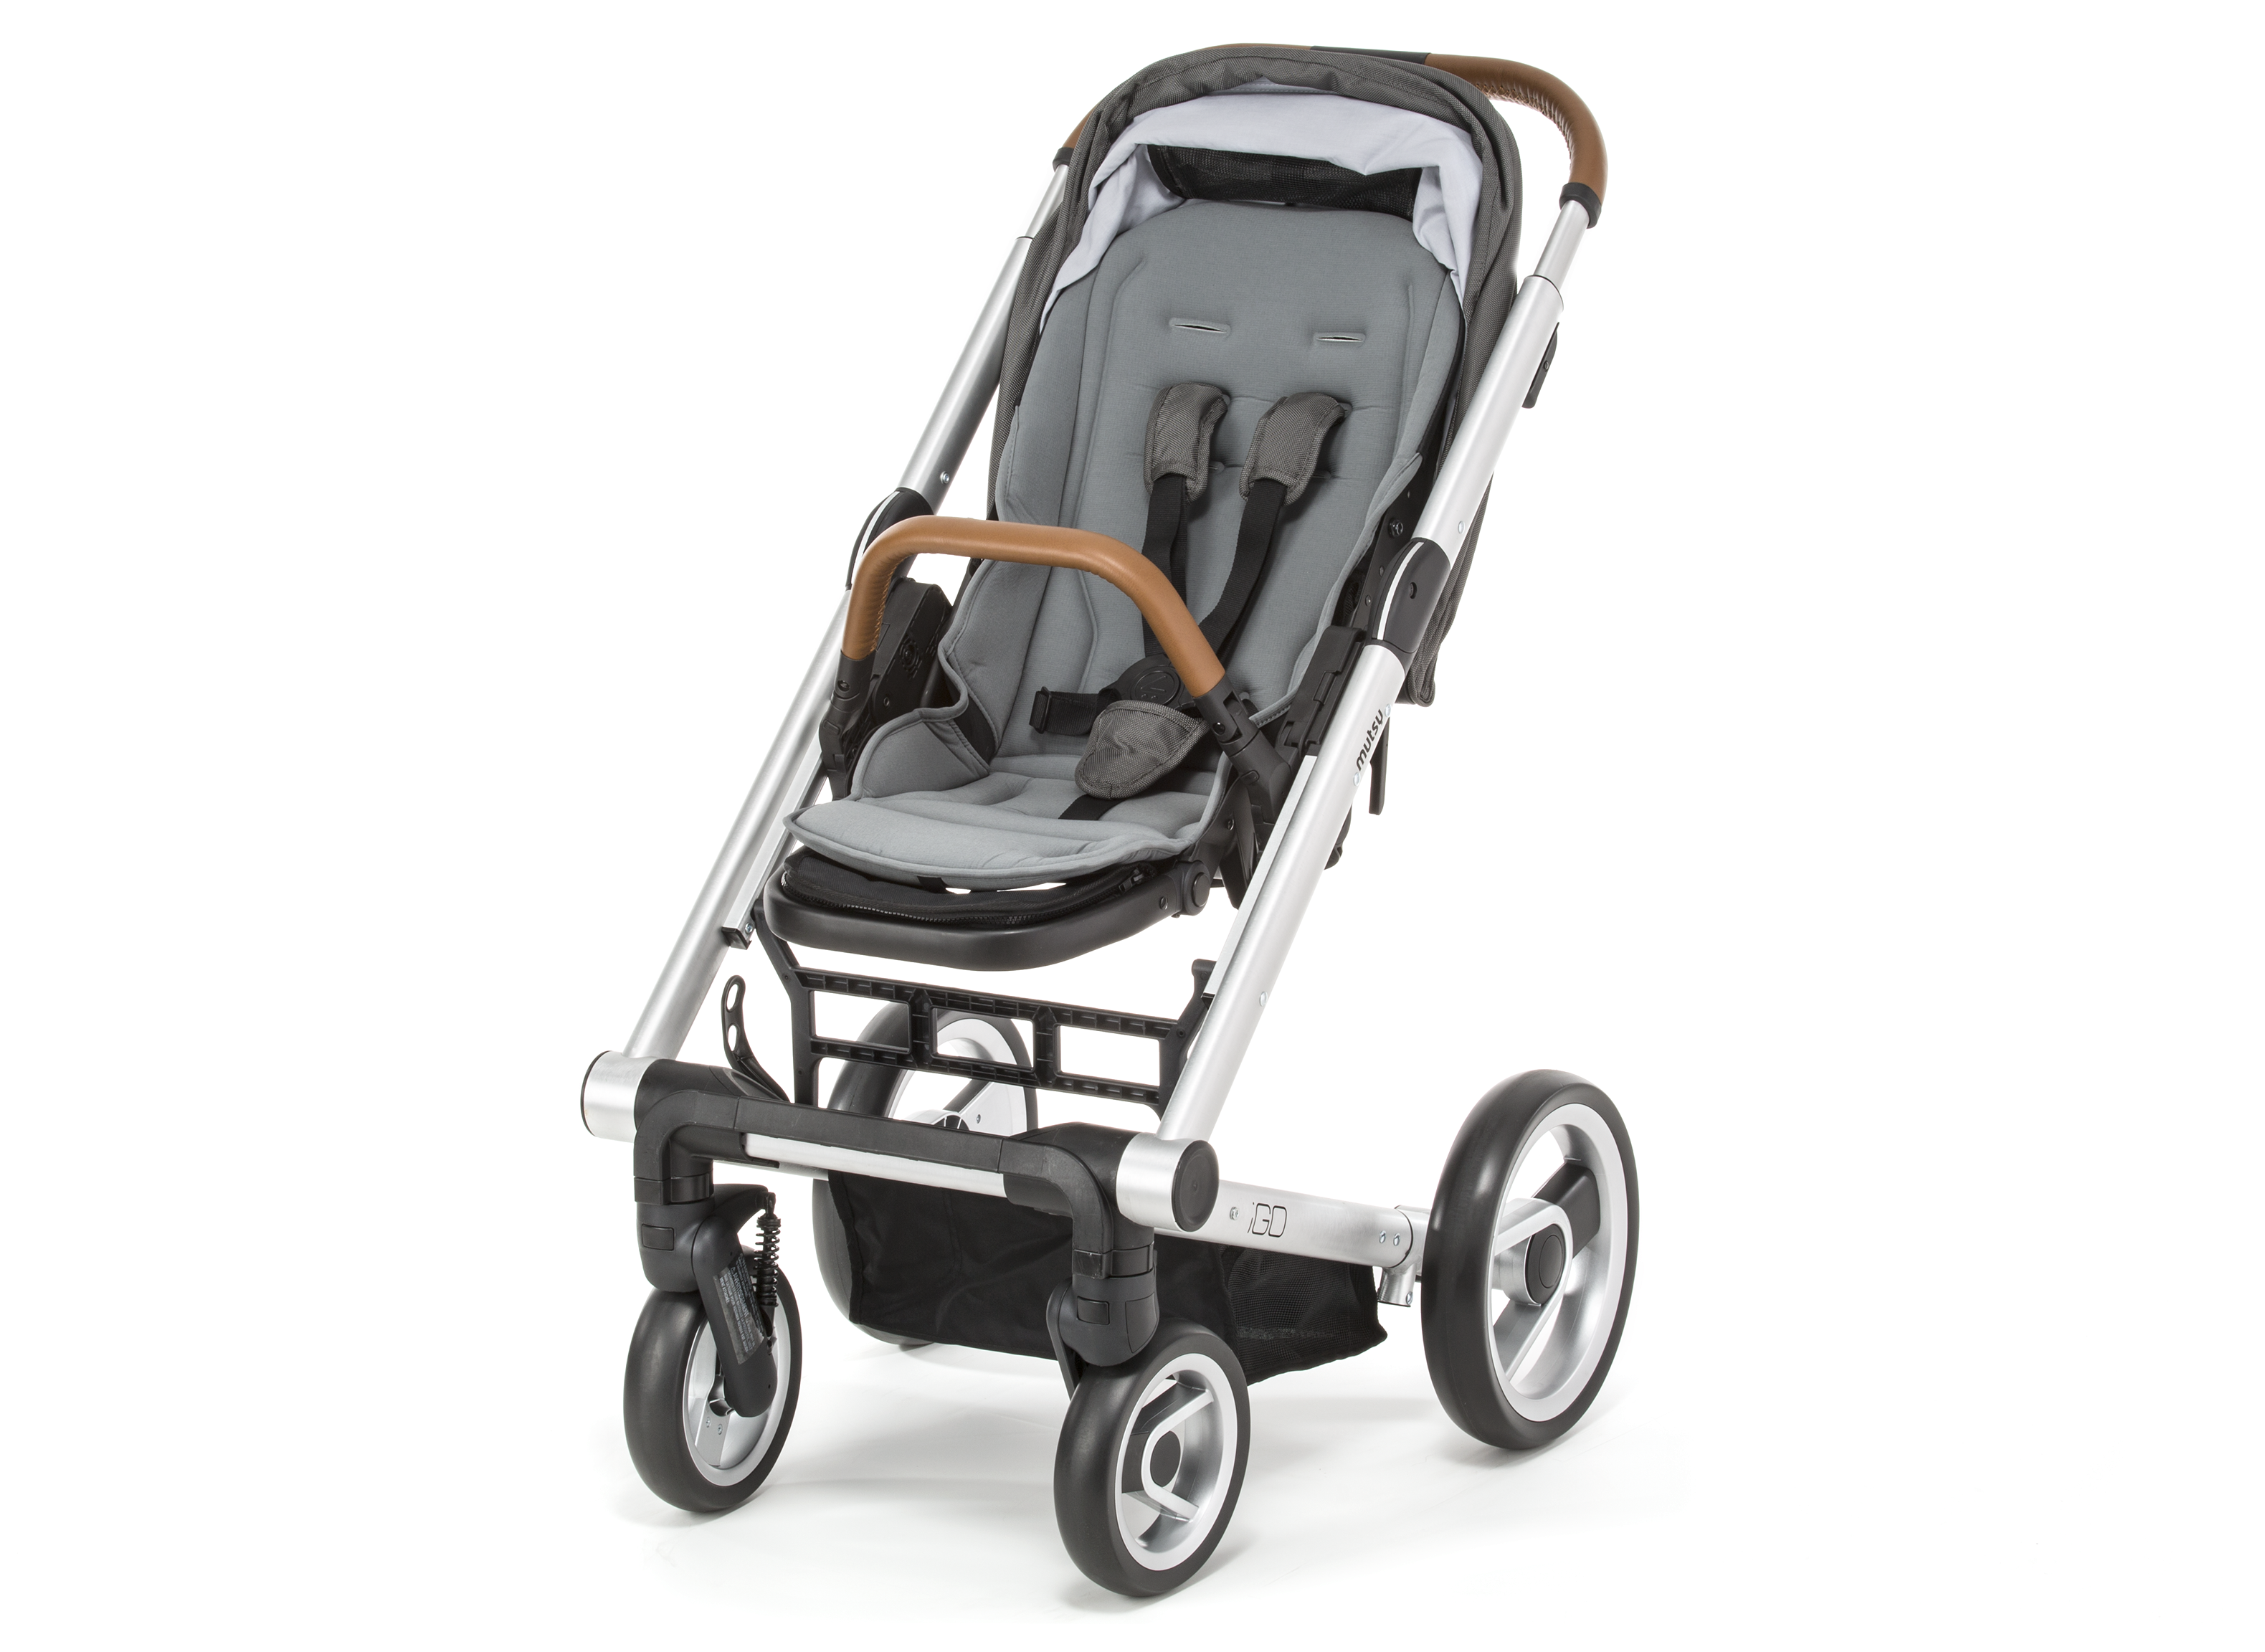 Beoefend Genre Aas Mutsy Igo Urban Nomad Stroller Review - Consumer Reports